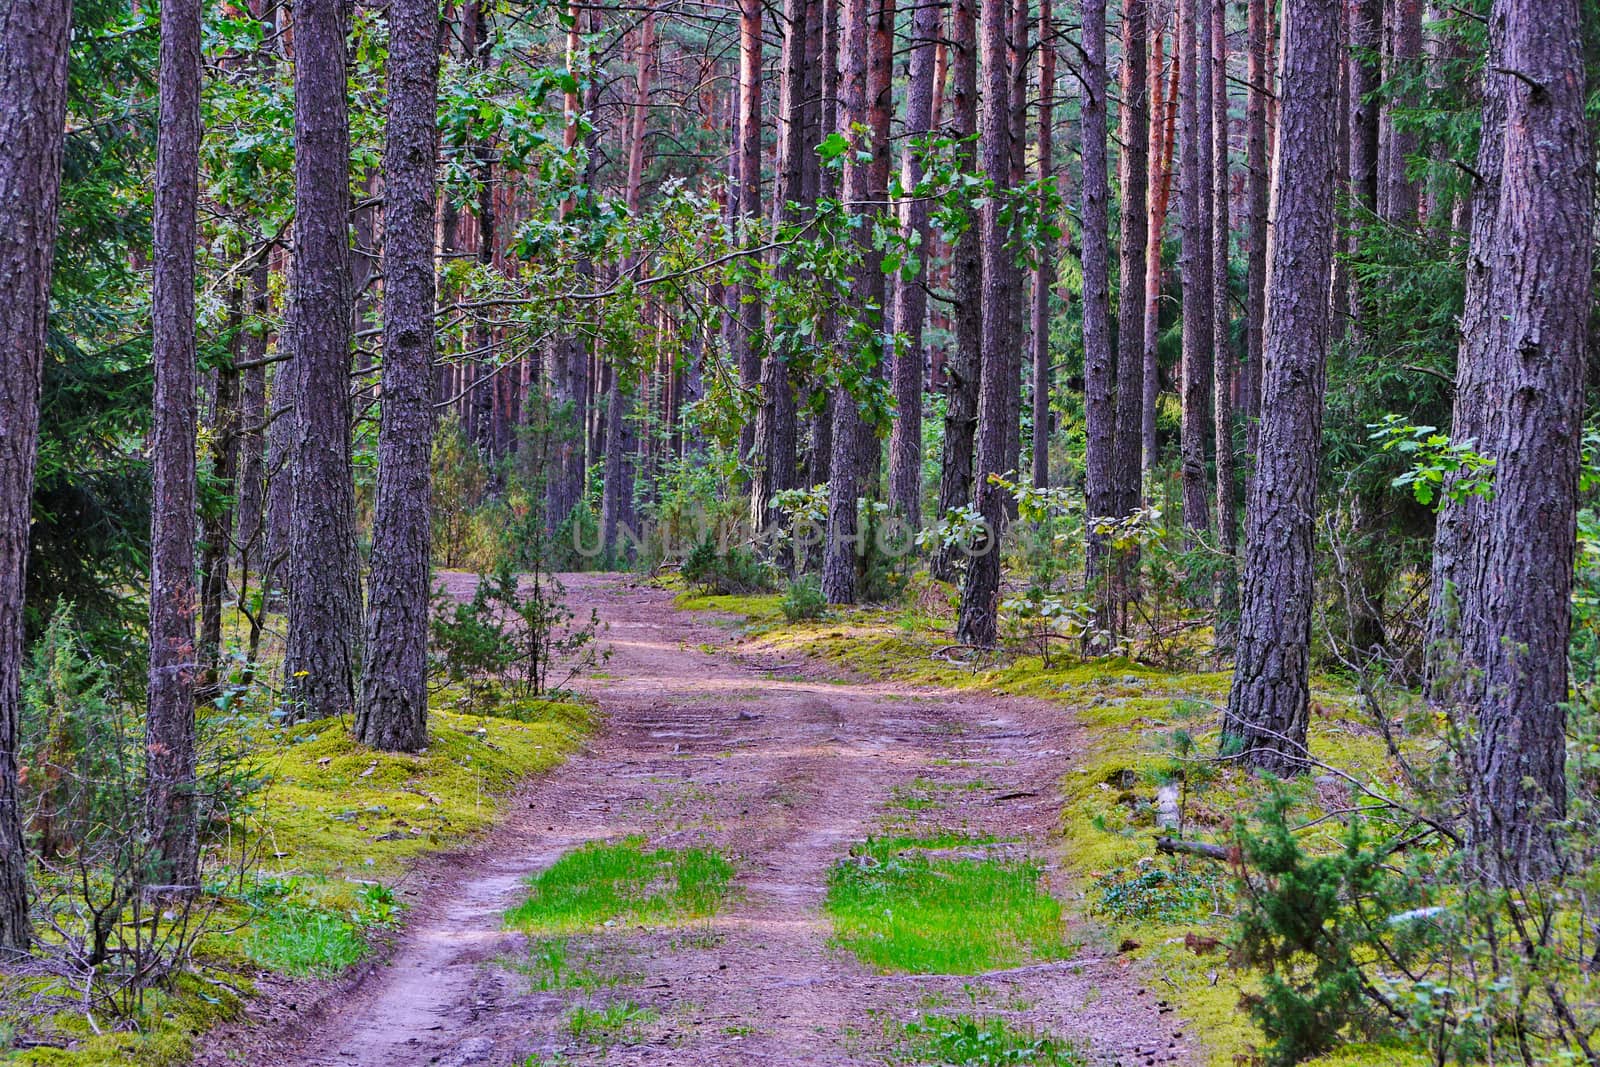 A wide path in the middle of a forest glade surrounded by tall, beautiful trees by Adamchuk